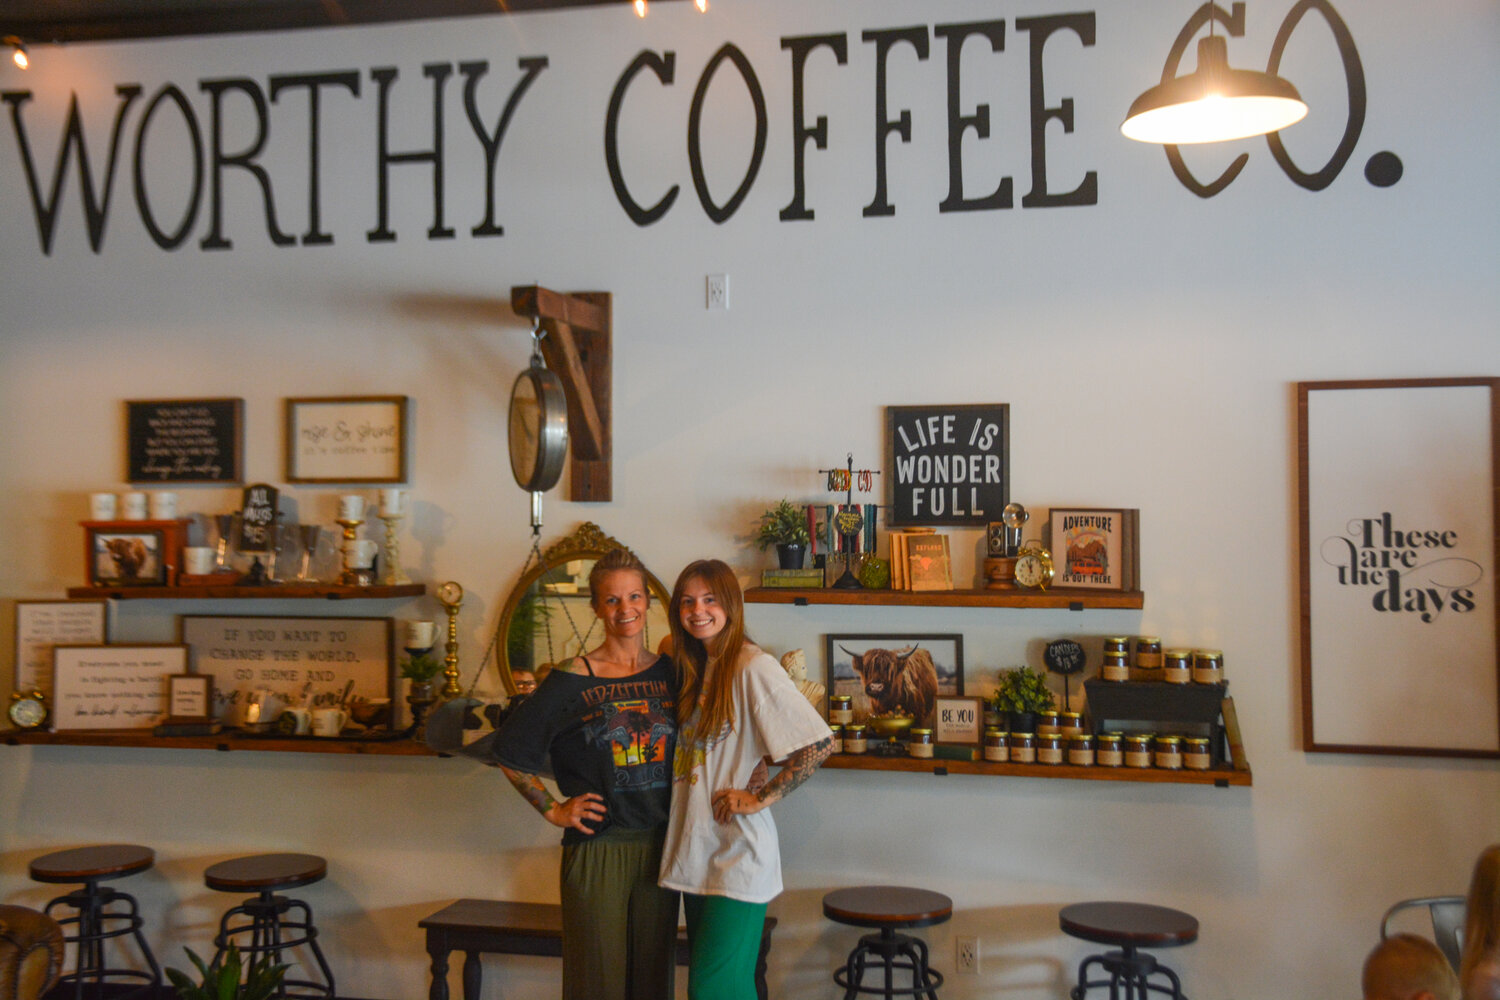 Brandi Worthy and Presly Littlejohn smile near a decorative wall at Worthy Coffee Co. in McKenna on June 26.